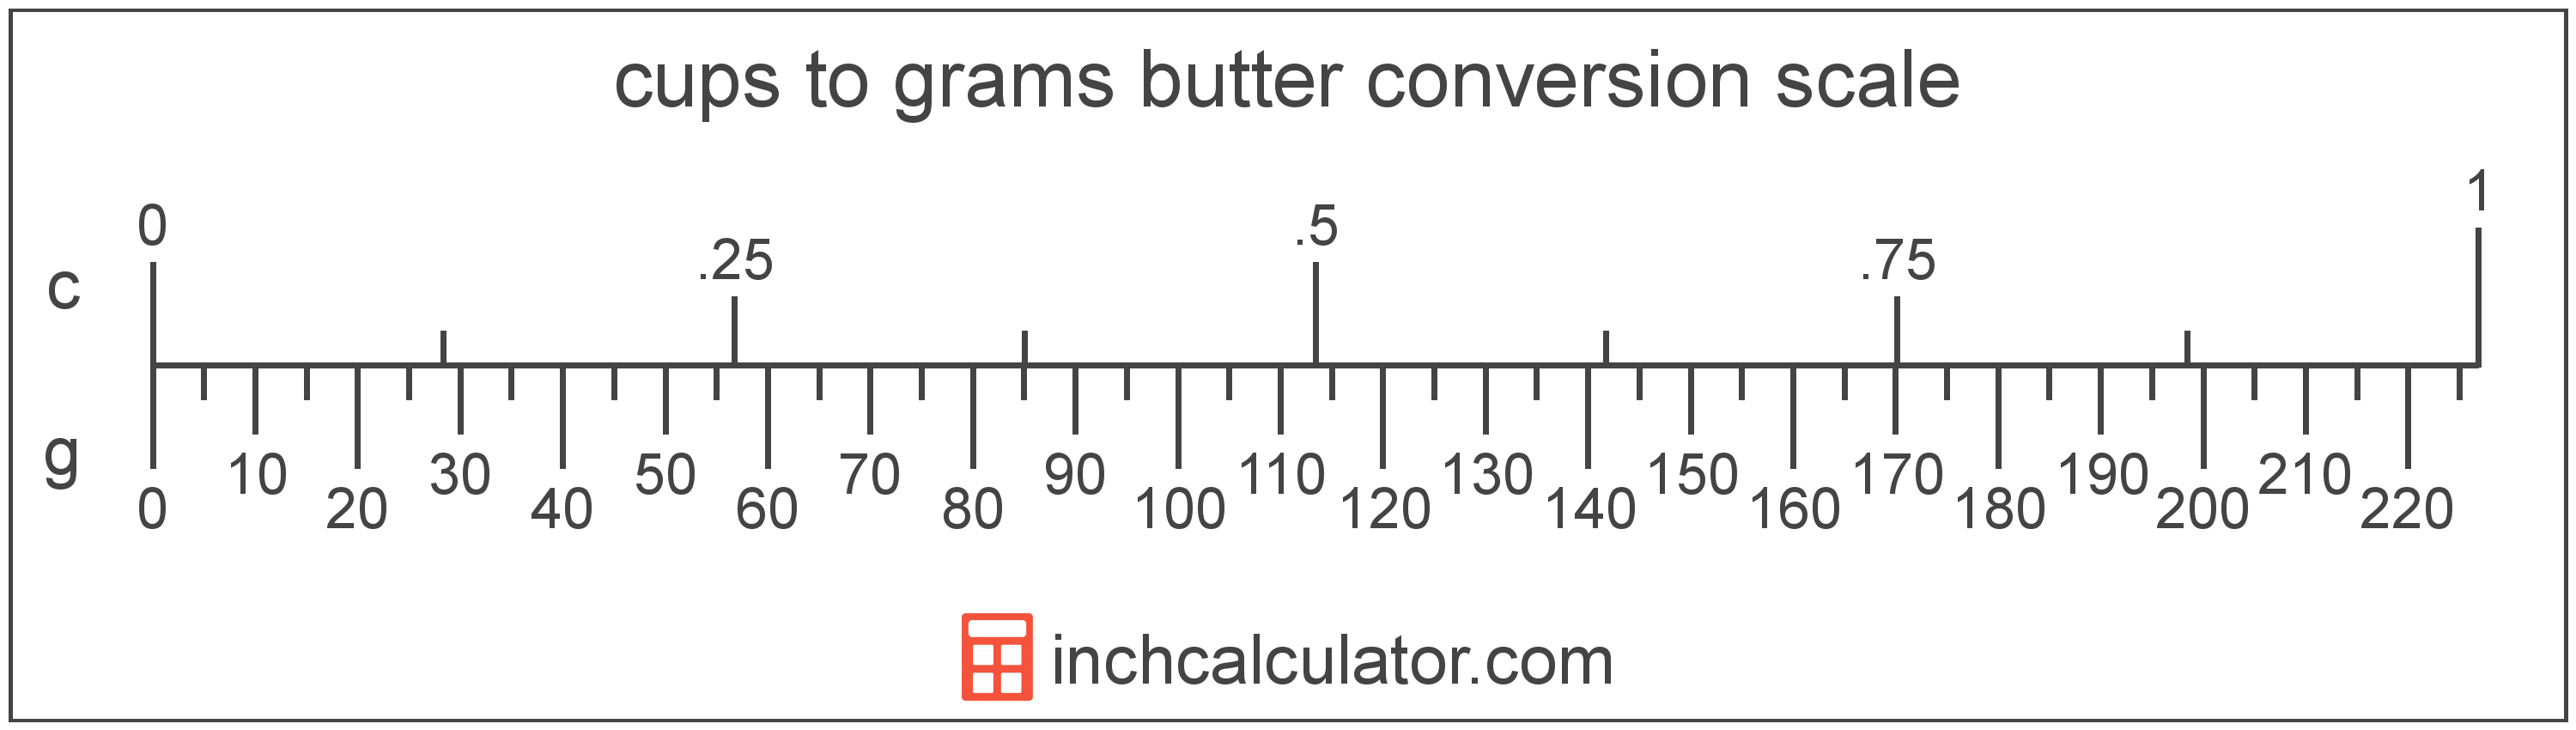 Cups Of Butter To Grams Conversion (C To G) - Inch Calculator